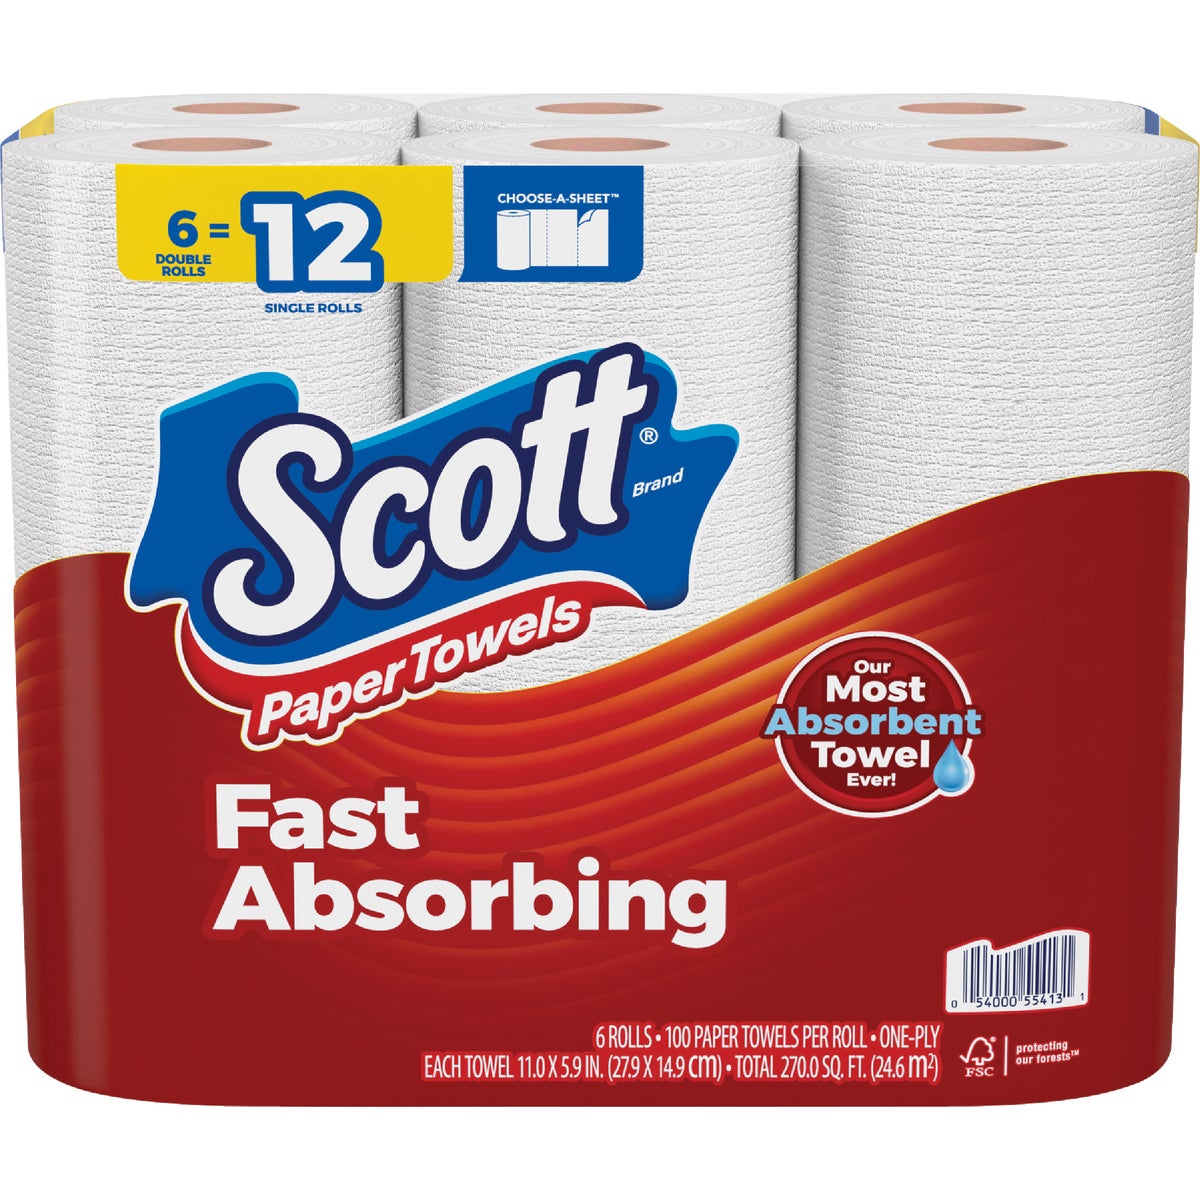 Item 600165, Get more sheets per dollar with our most absorbent towel ever, Scott Choose